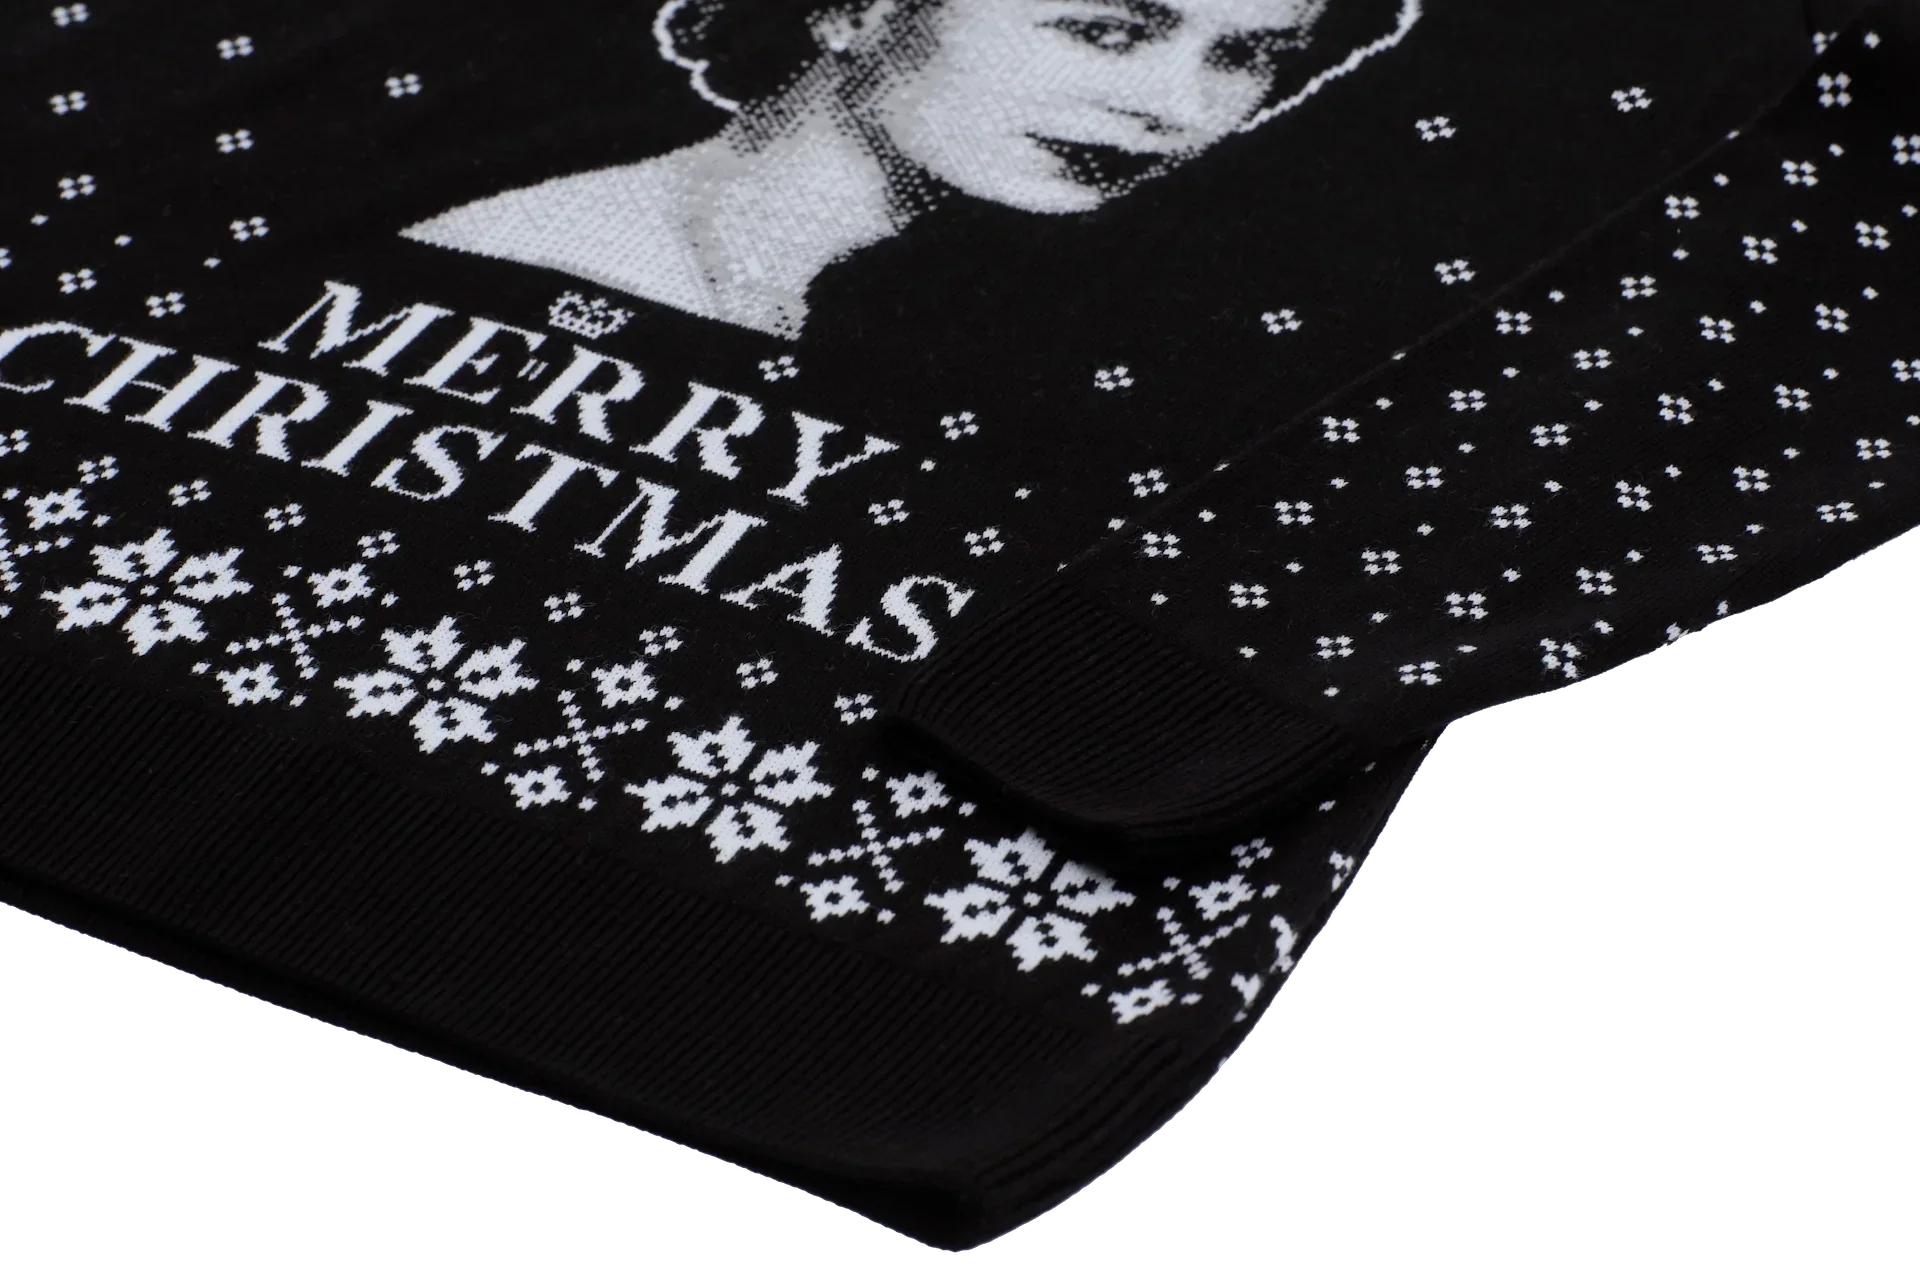 The Queen Christmas Jumper - Knitted in Britain - notjust